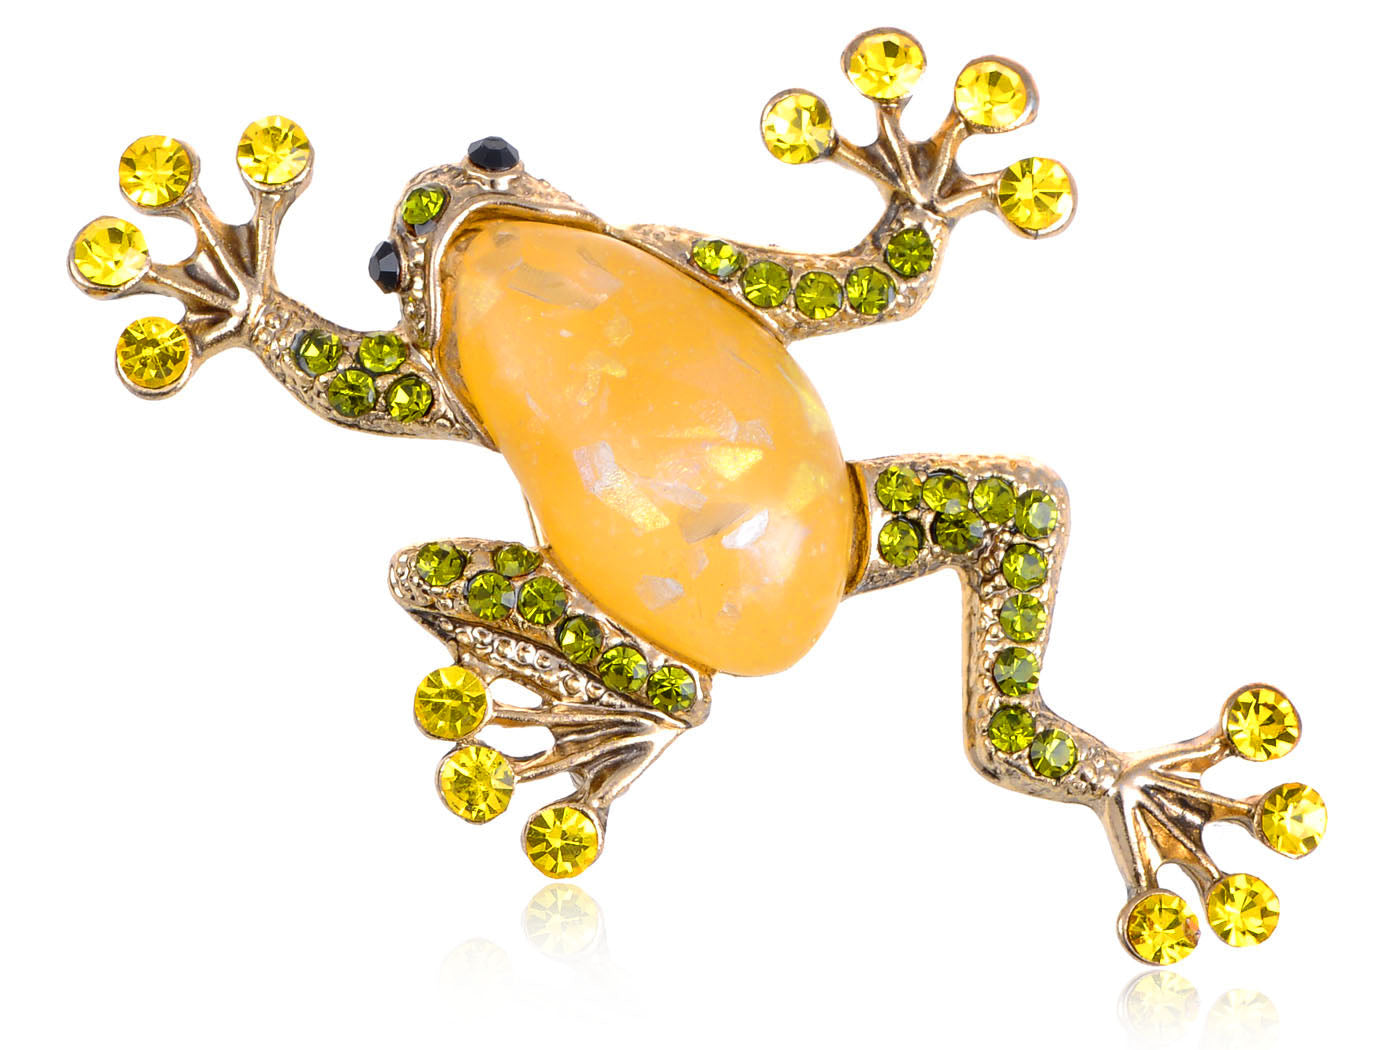 Lime Green Acry Gem Frog Toad Amphibian Pin Brooch